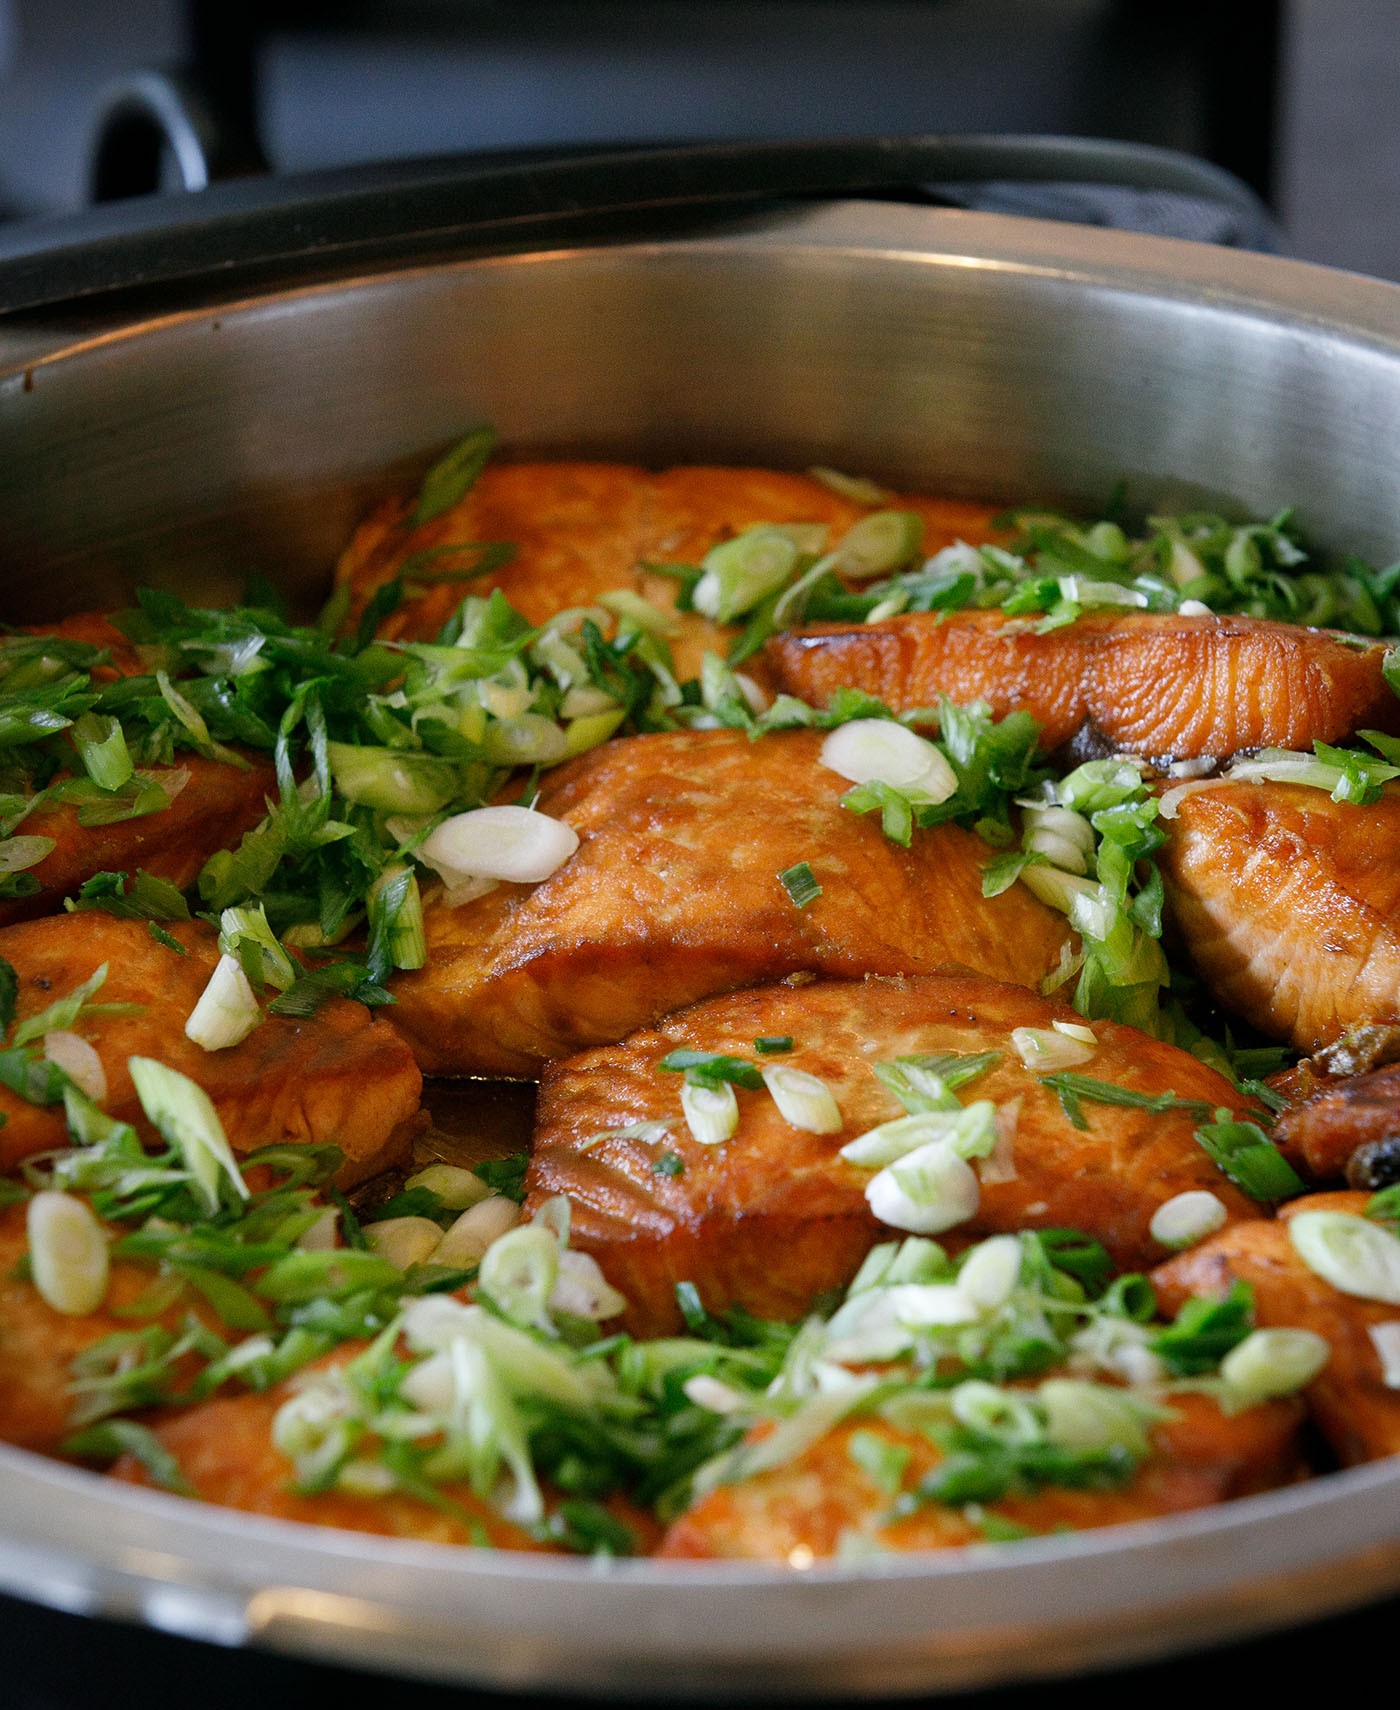 Salmon topped with green onion slices in a black serving dish.